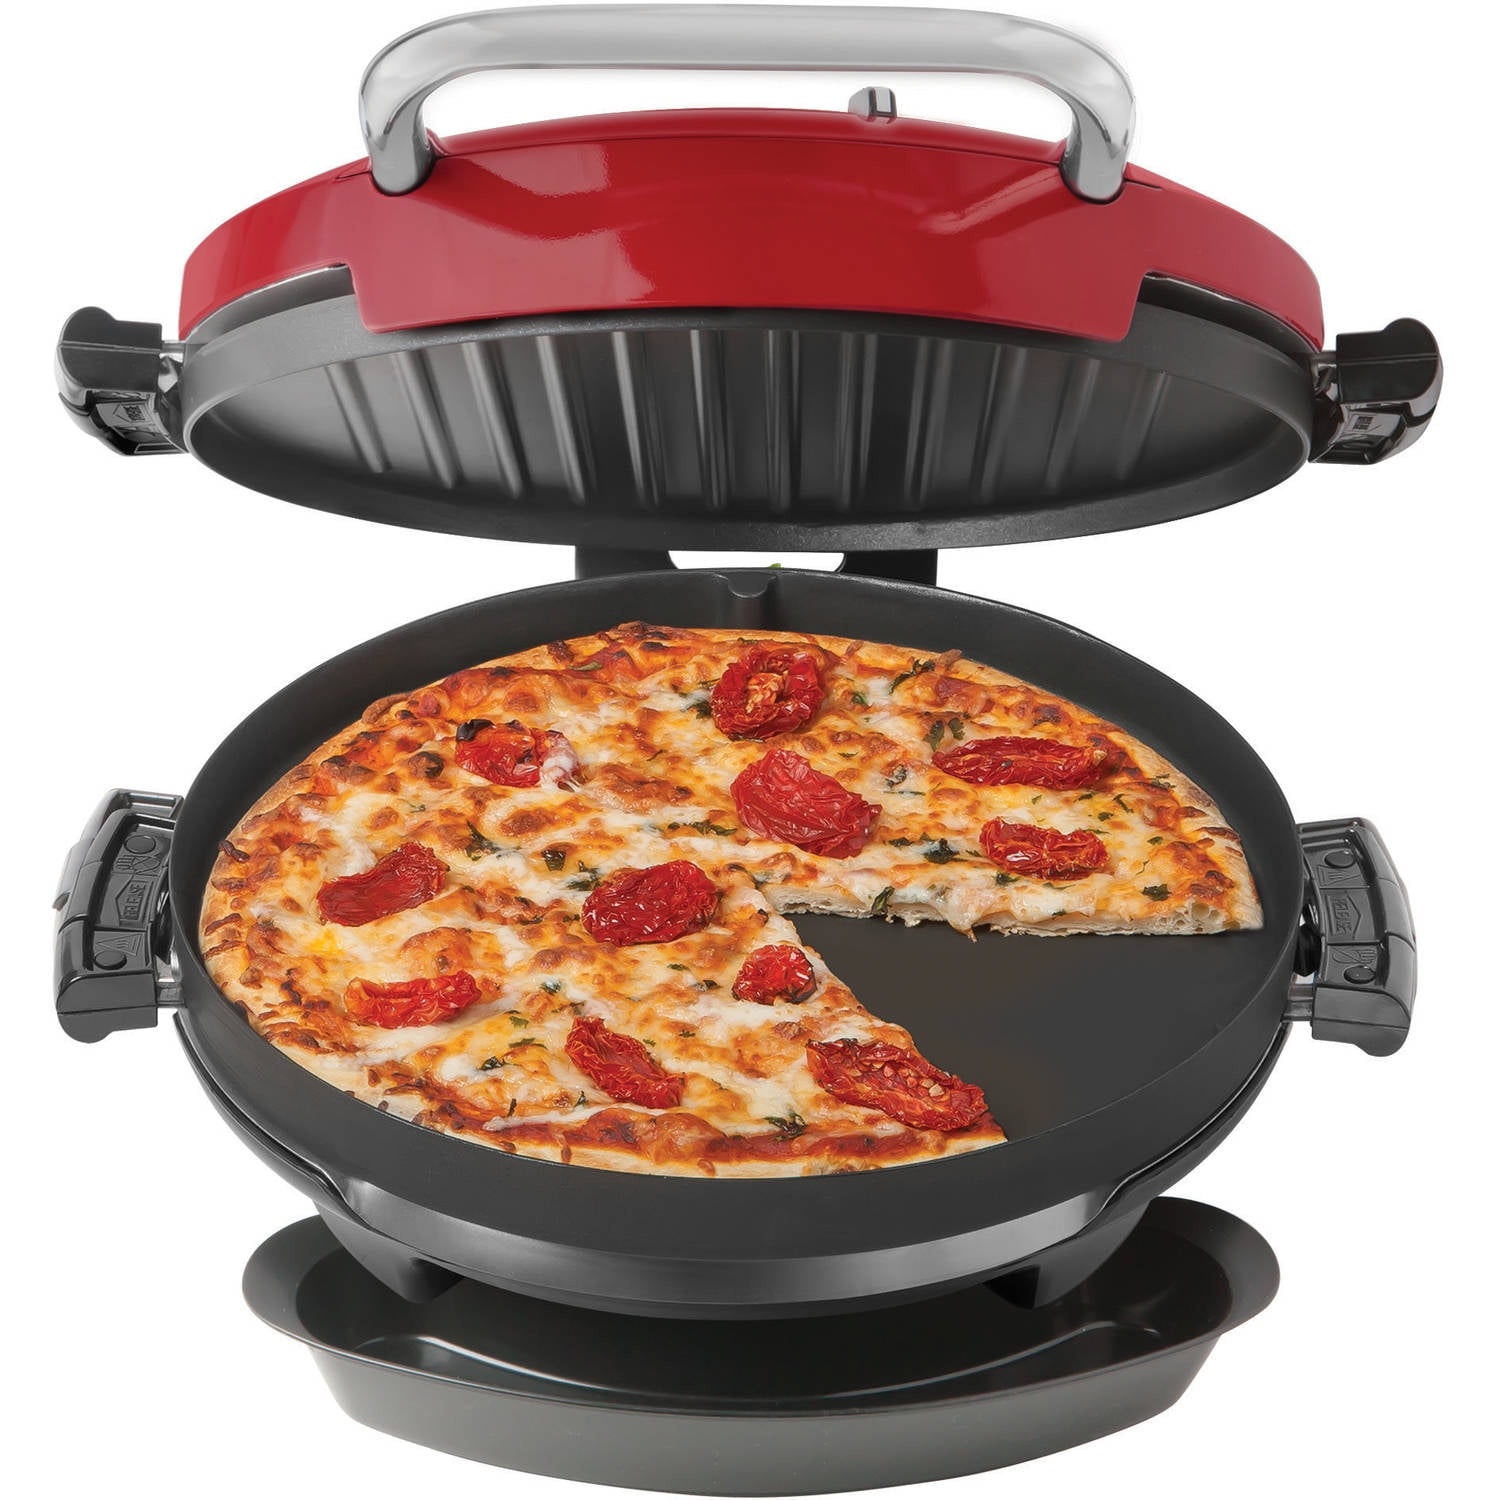 RV cooking: Pizza on the George Foreman Grill